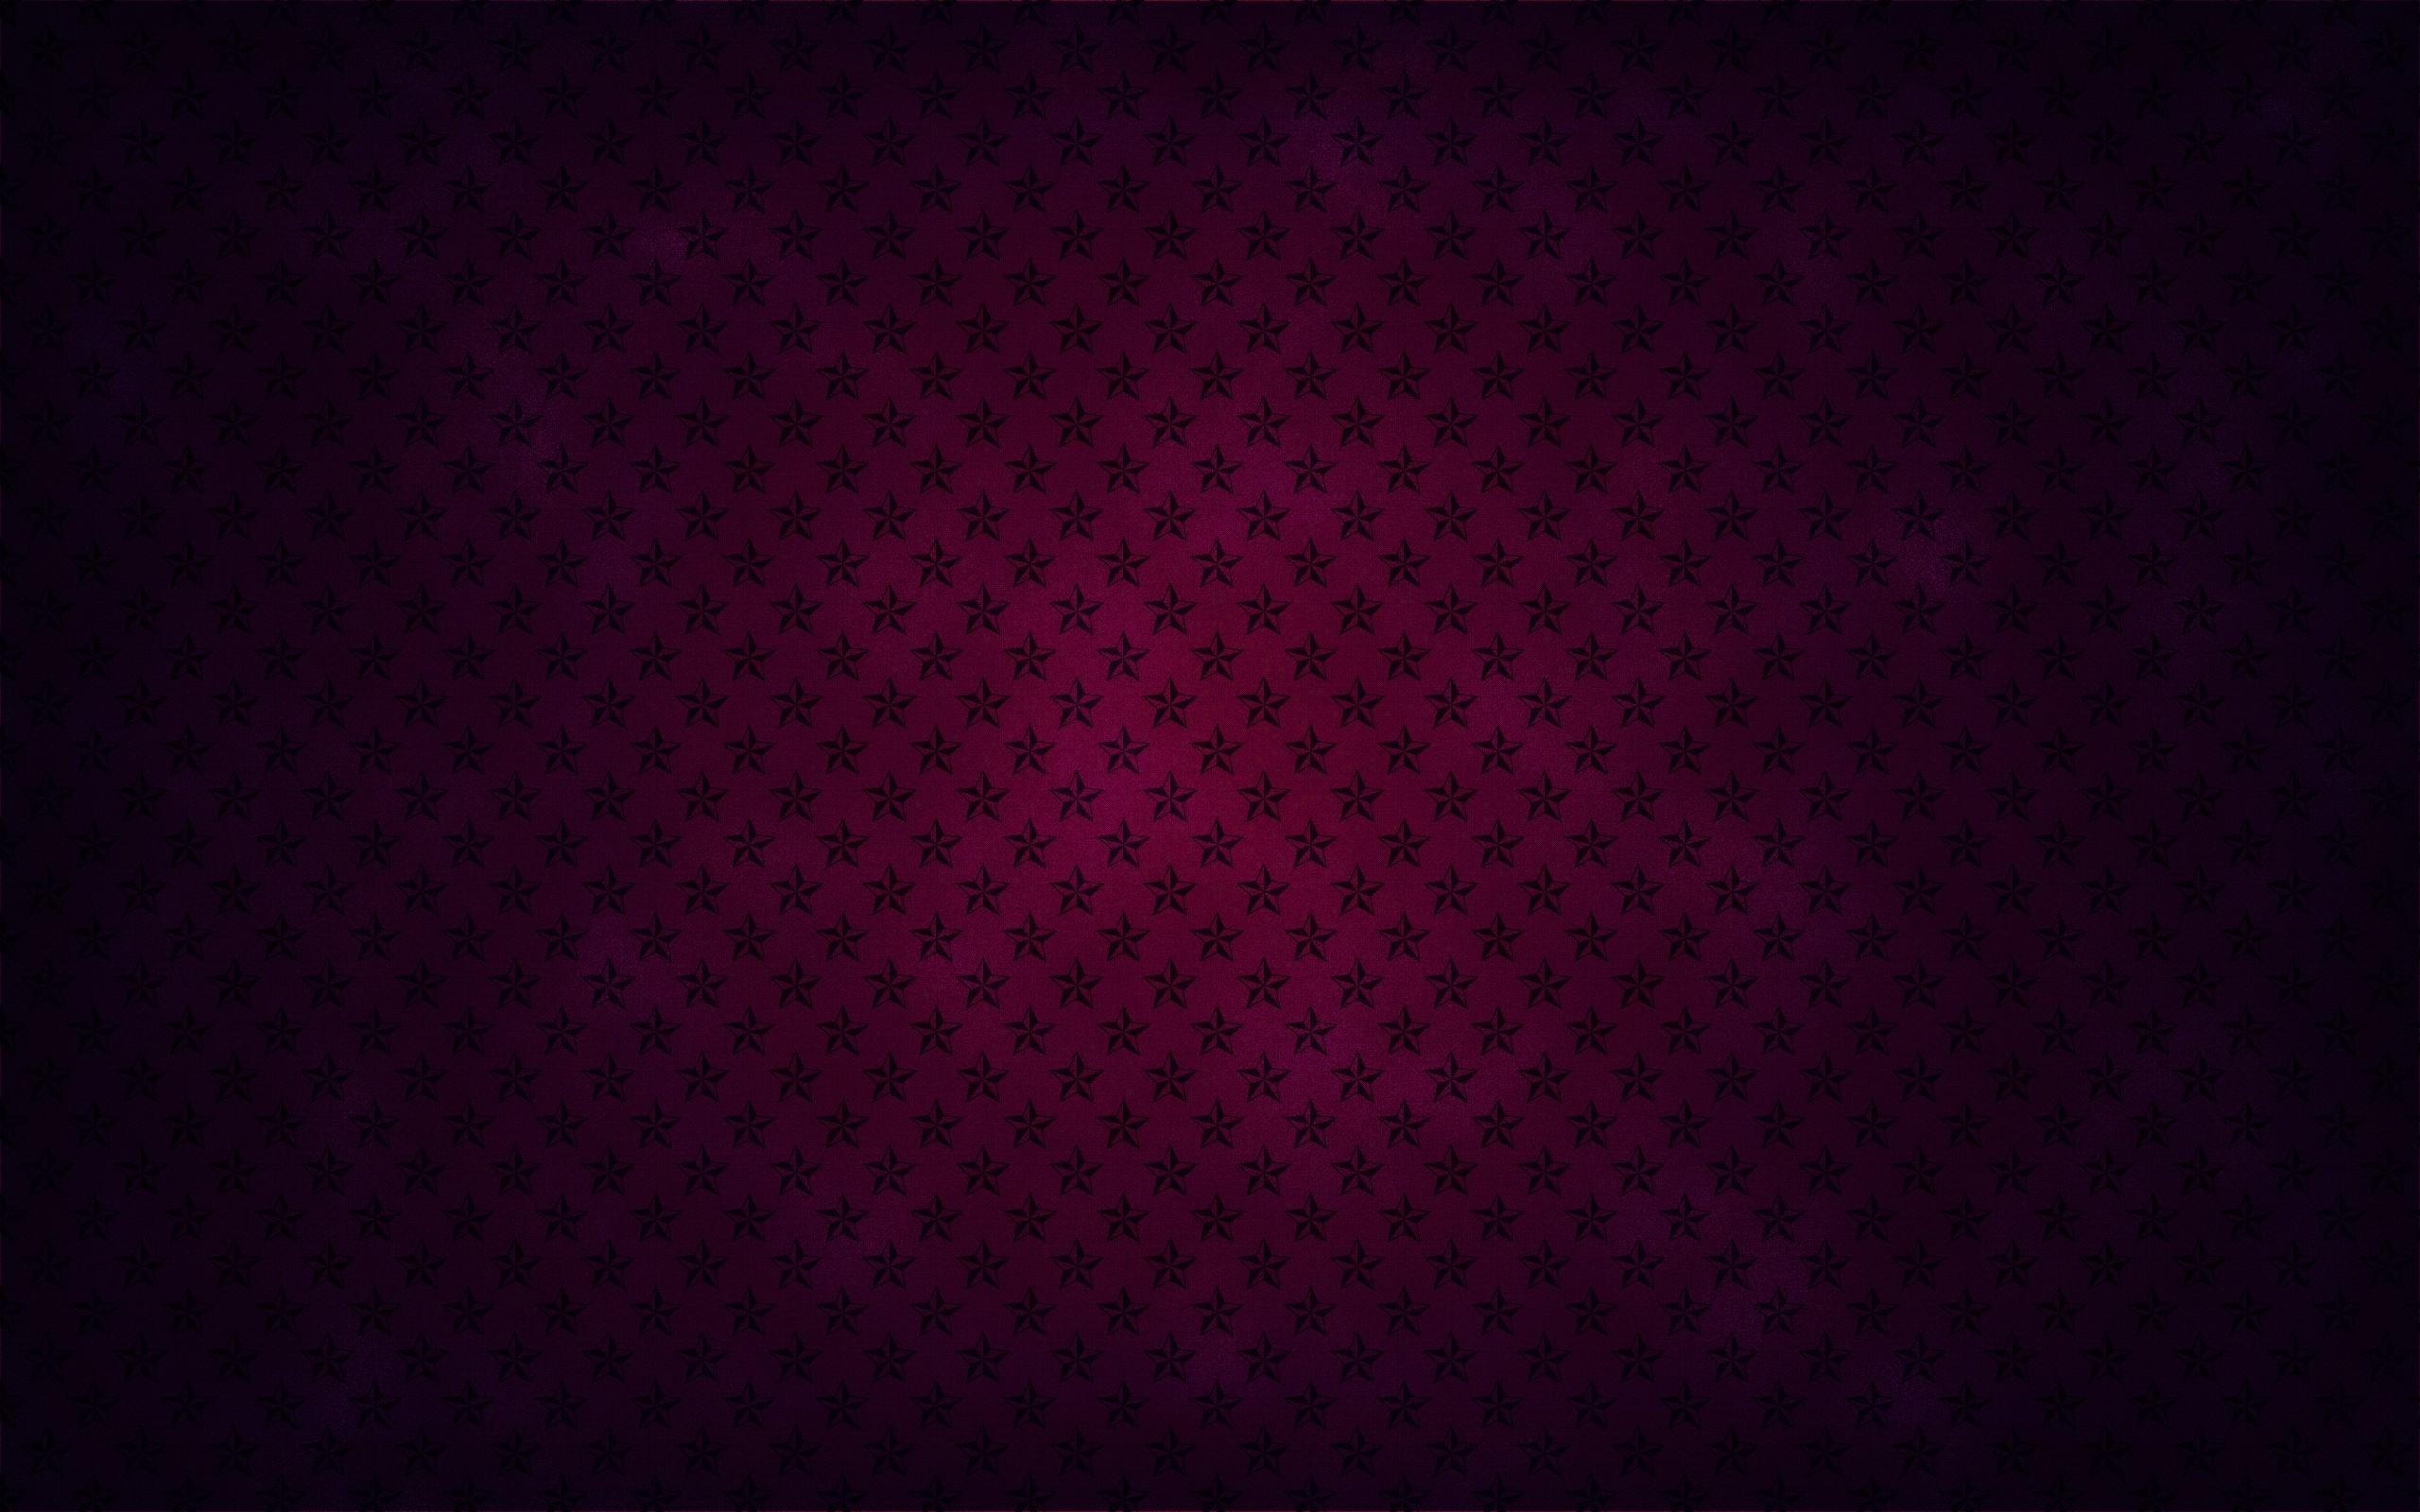 2560x1600 Wallpapers Backgrounds - Home Plain backgrounds Wallpaper pink black star